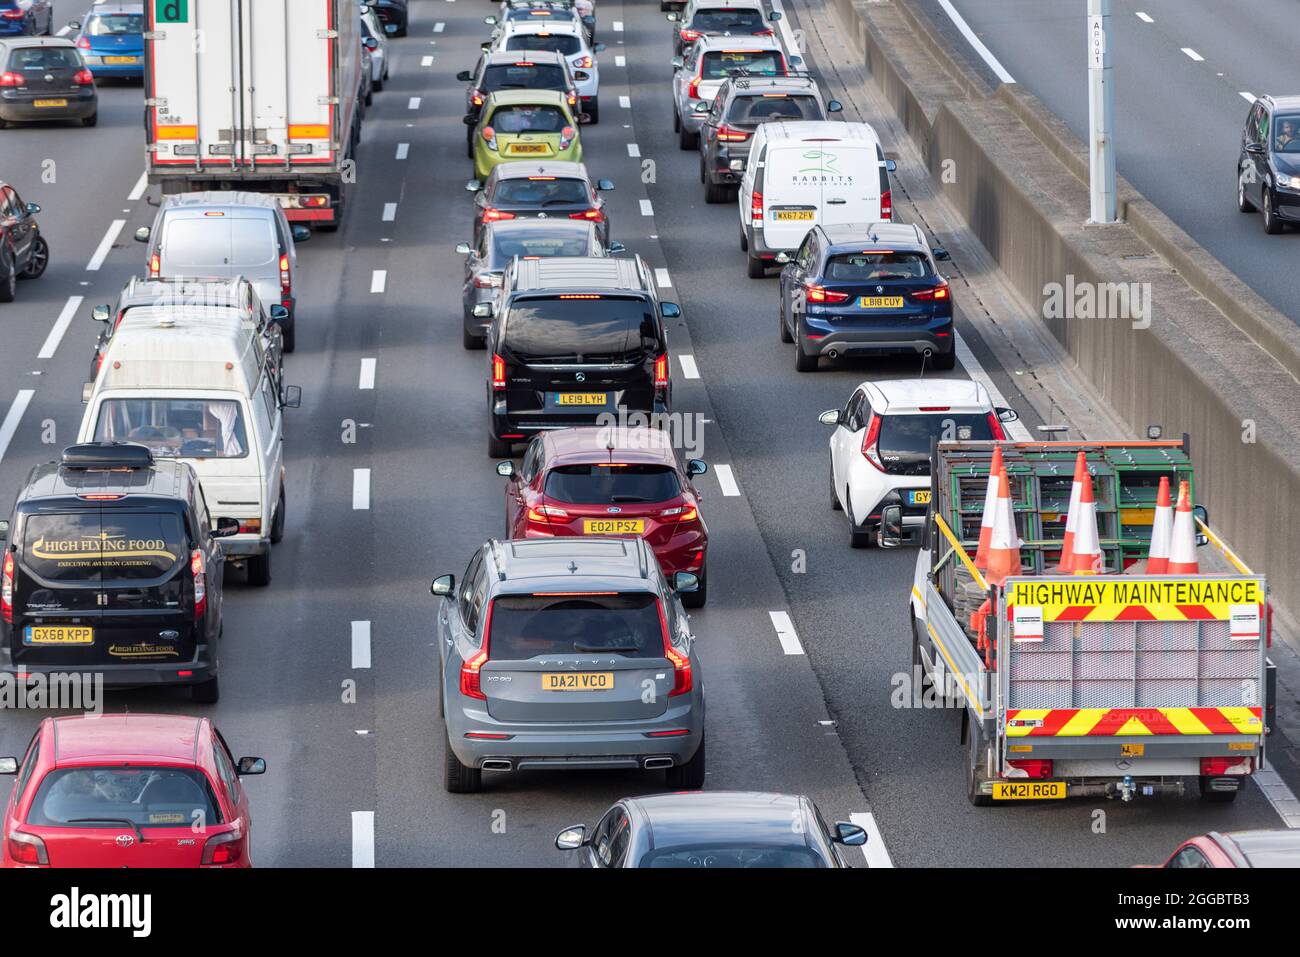 Section of M25 motorway in Longford near Heathrow Airport, UK, busy with traffic on a Bank Holiday August summer weekend. Highway Maintenance cones Stock Photo